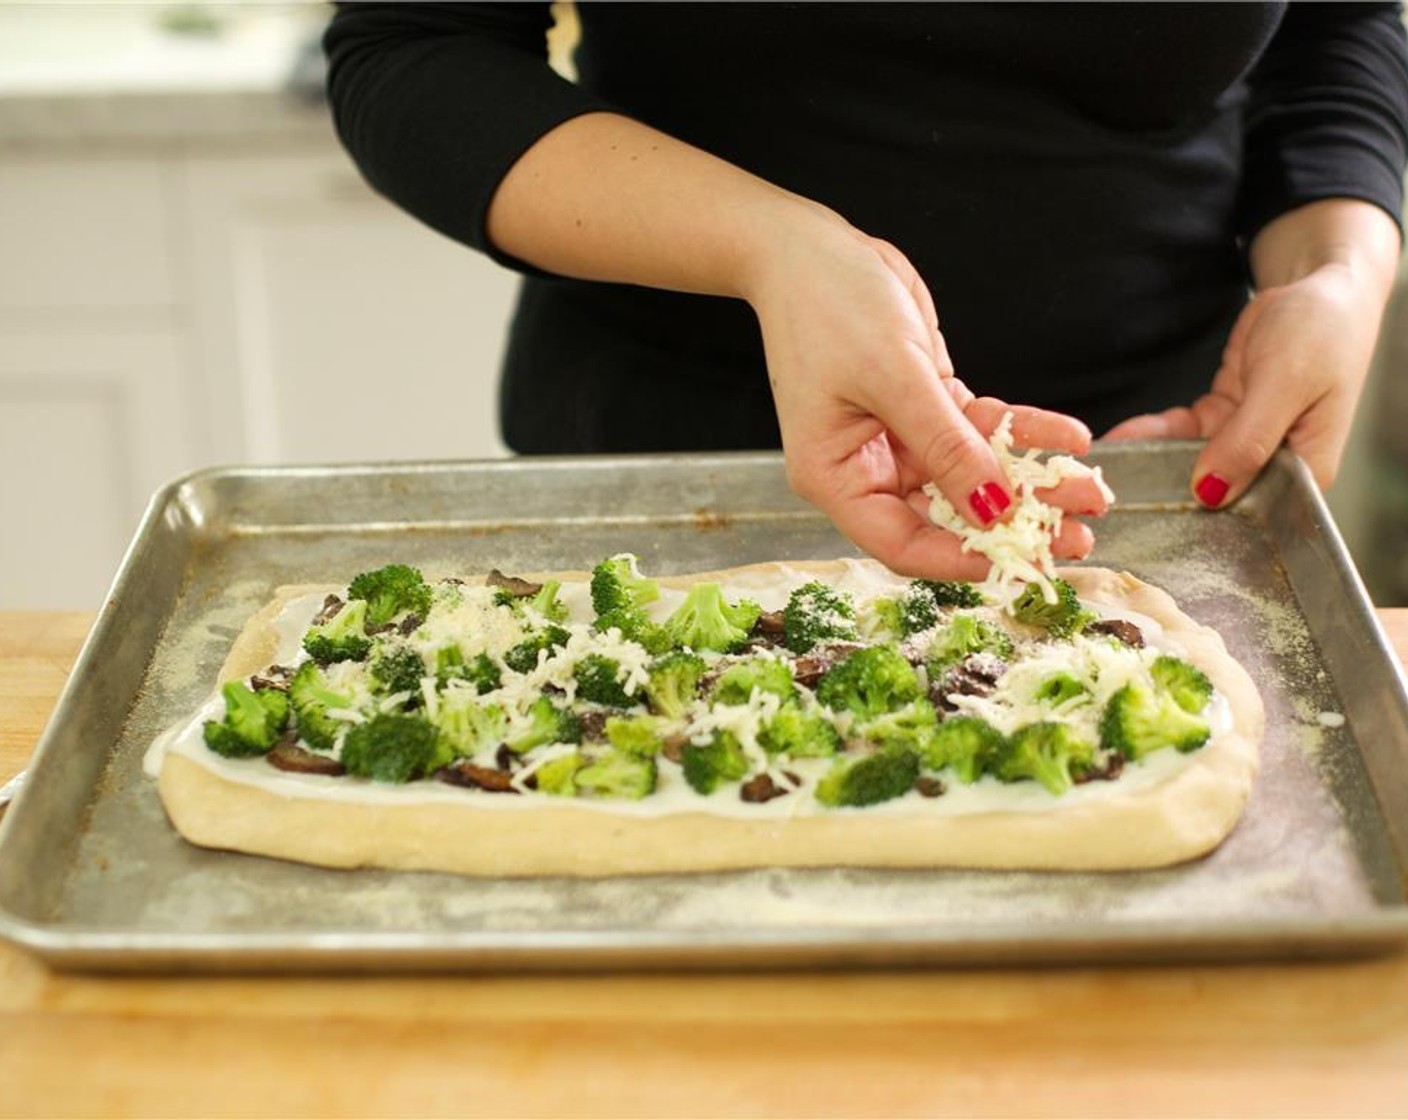 step 12 Remove from the oven and spread more sauce evenly oven the dough. Use a slotted spoon to place broccoli onto the crust and then add the mushrooms, evenly spreading the ingredients. Sprinkle remaining Mozzarella Cheese (1/4 cup) and grated Parmesan Cheese (2 Tbsp) on top.